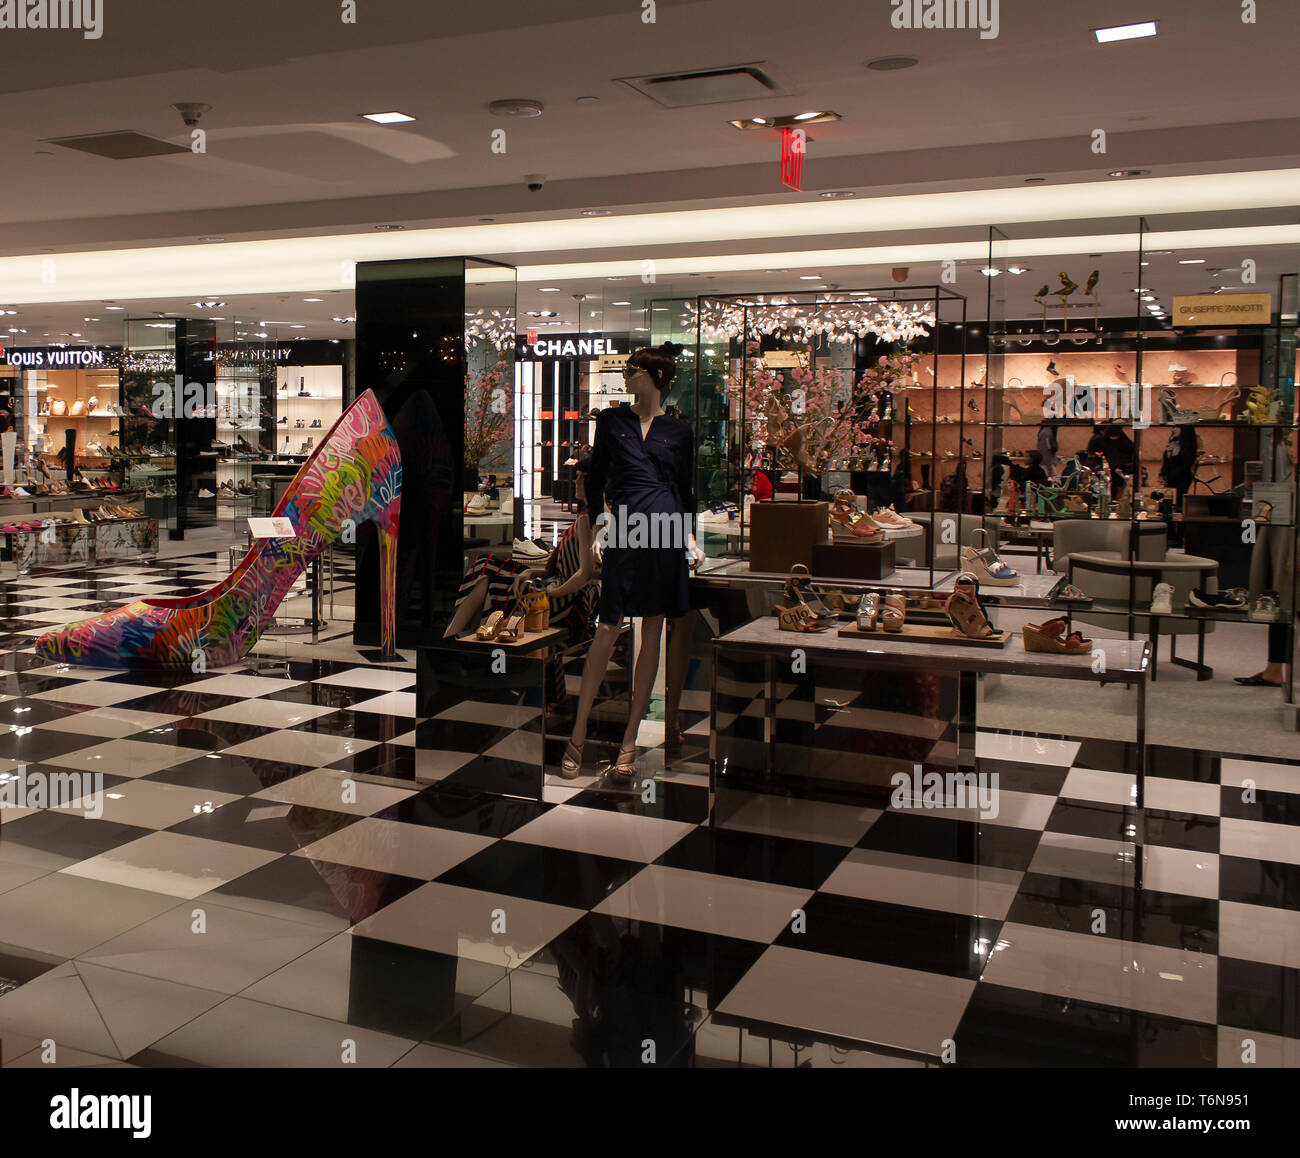 Louis vuitton store interior hi-res stock photography and images - Alamy